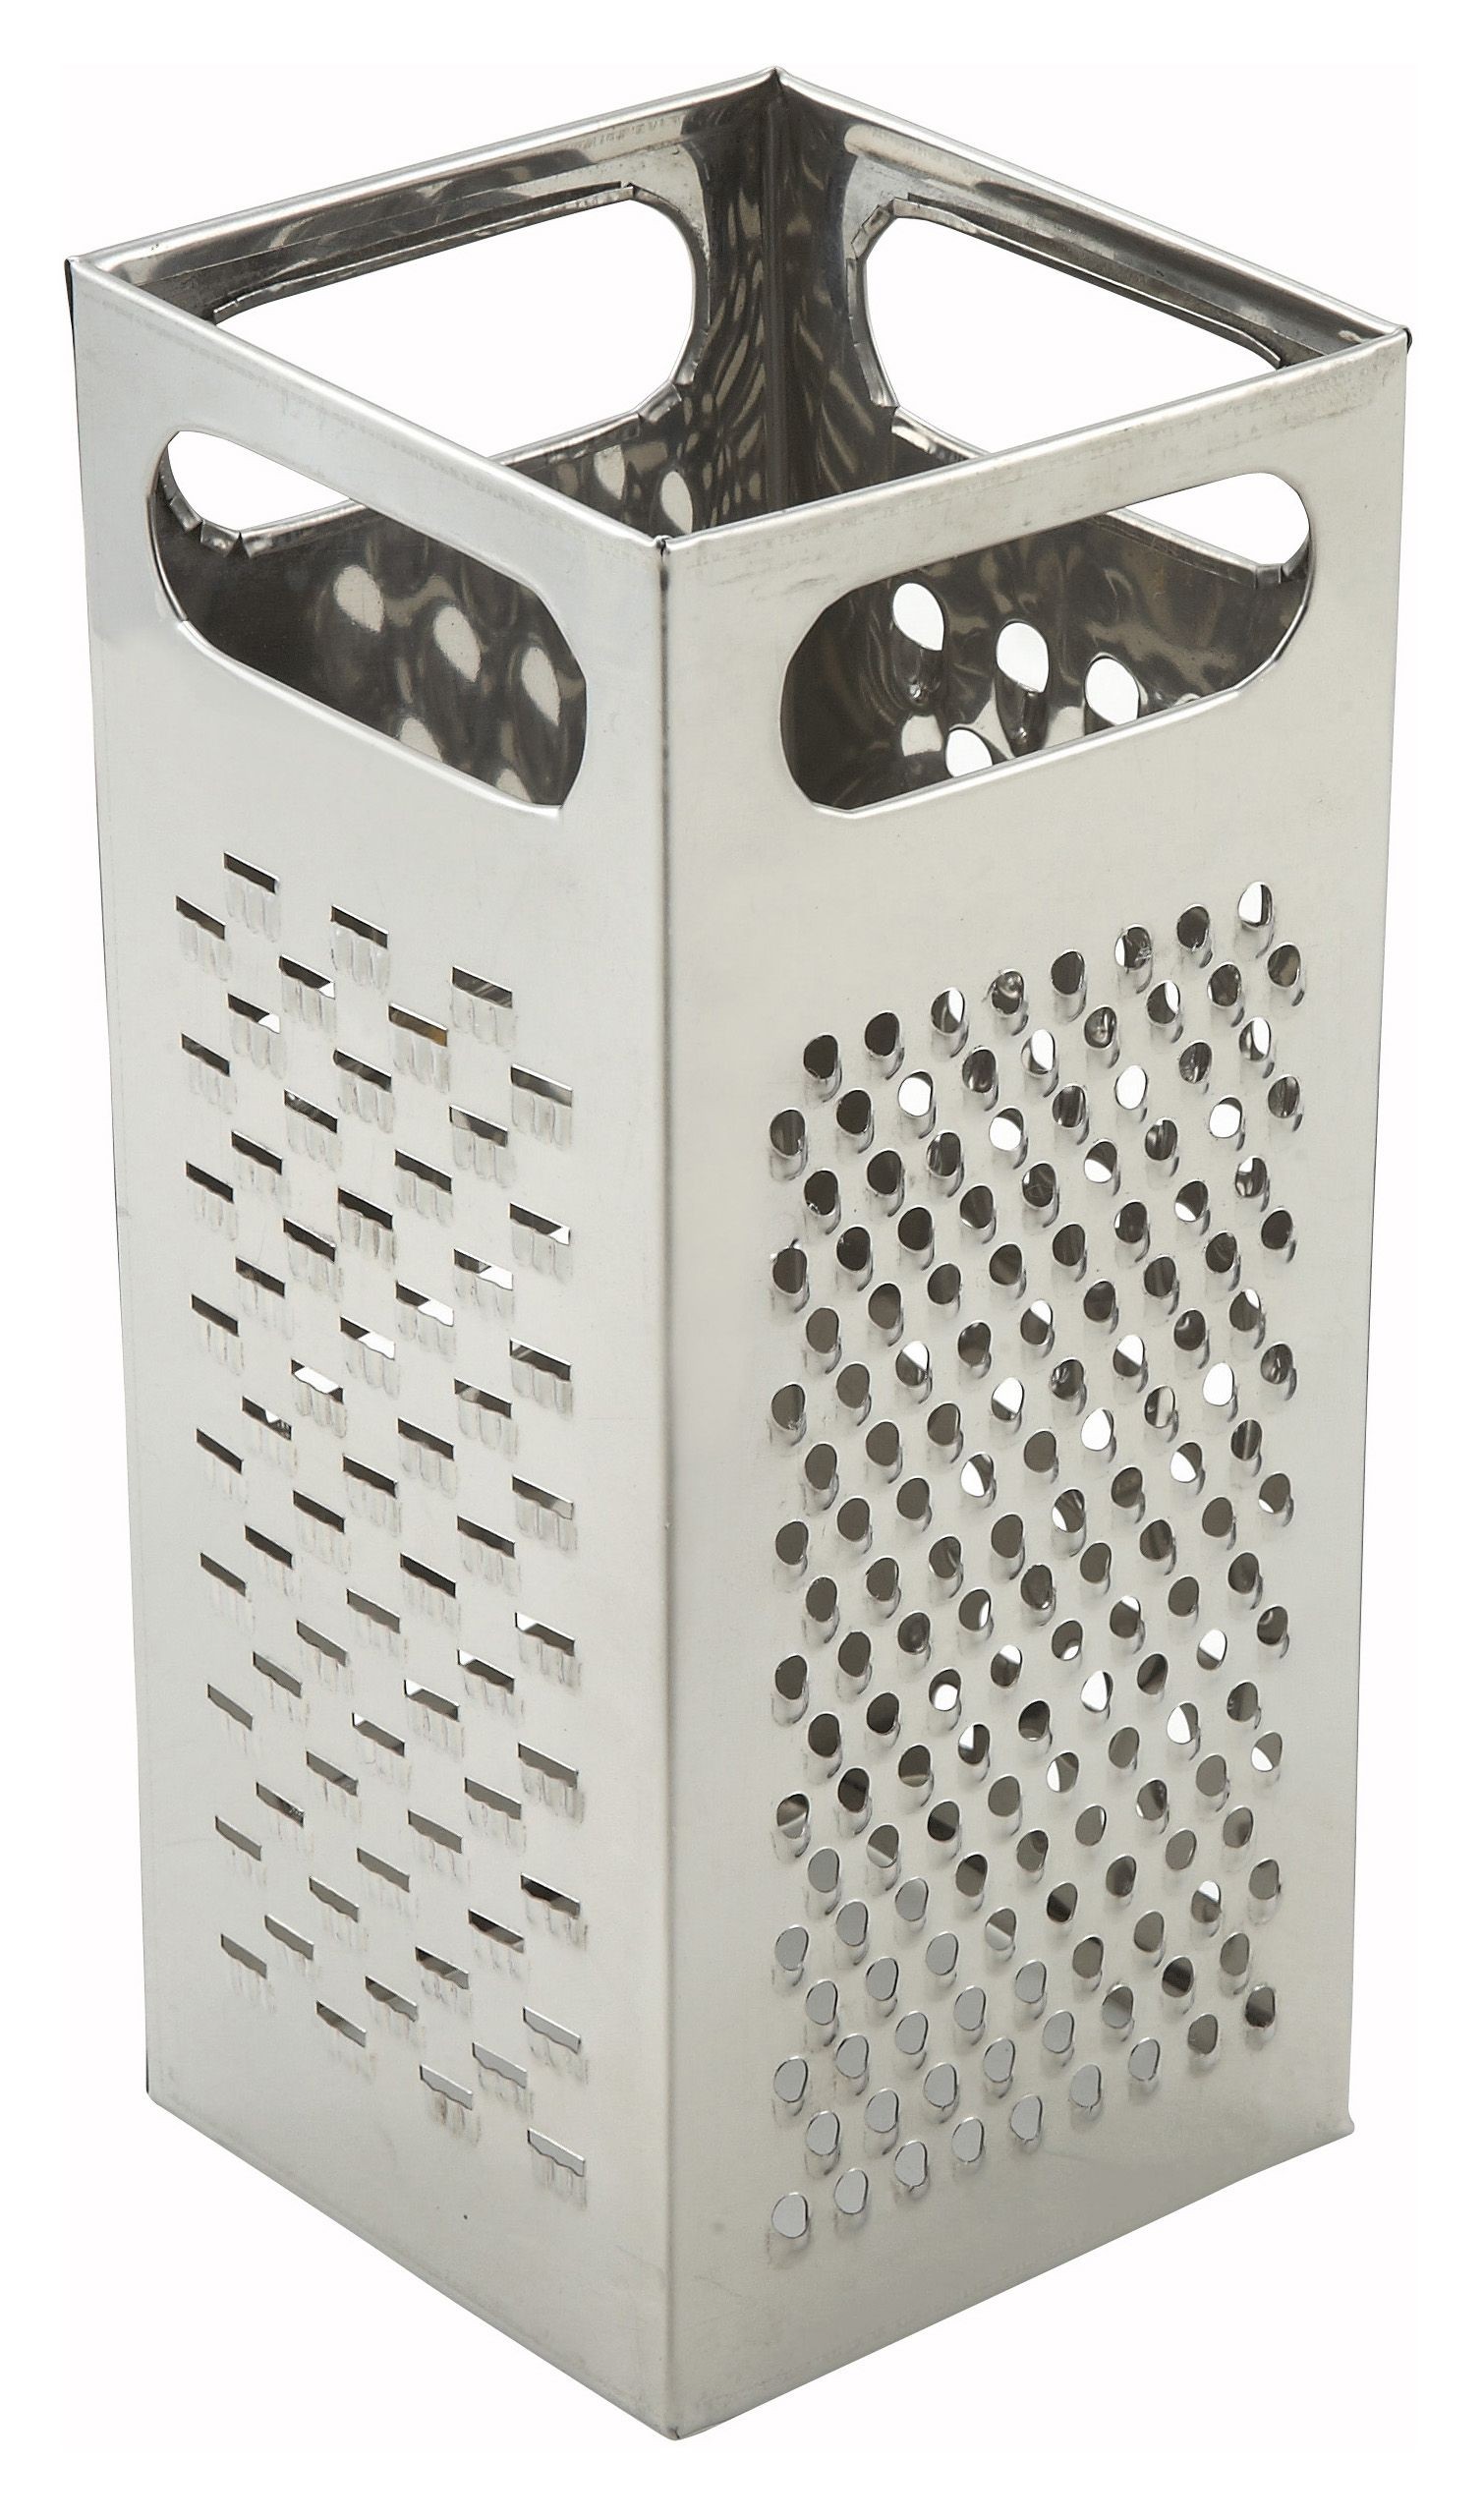 https://www.lionsdeal.com/itempics/Stainless-Steel-Square-Box-Grater-9--x-4-32120_xlarge.jpg